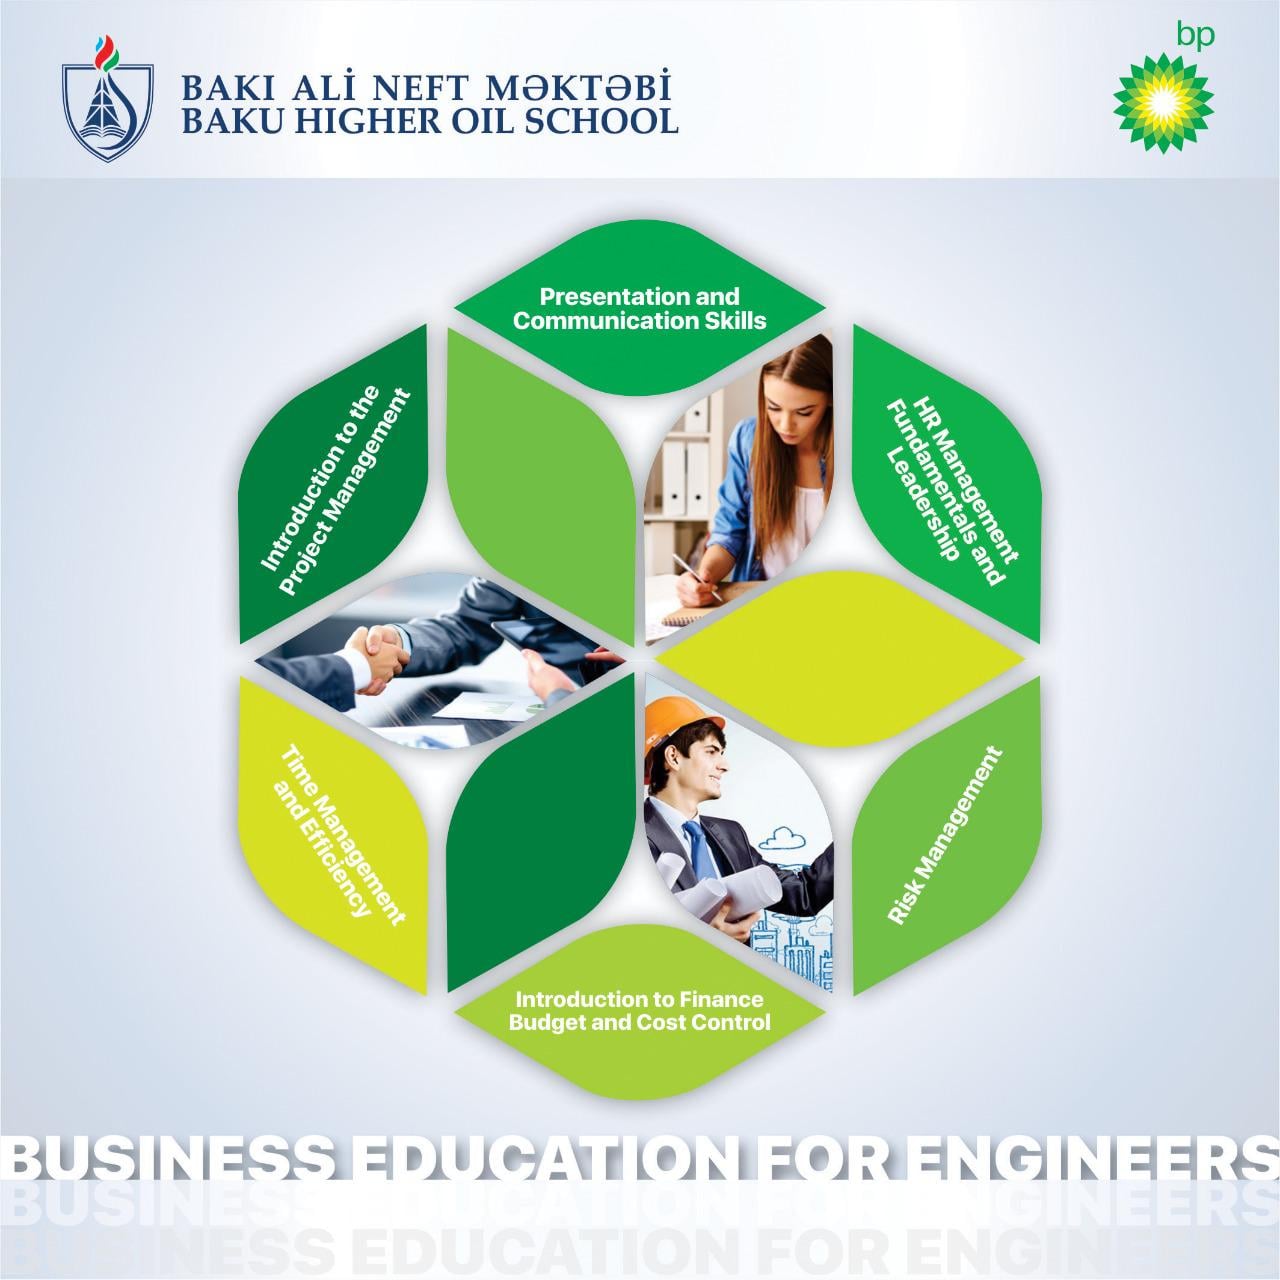 Opportunity for BEU students to participate in "Business Education for Engineers" project